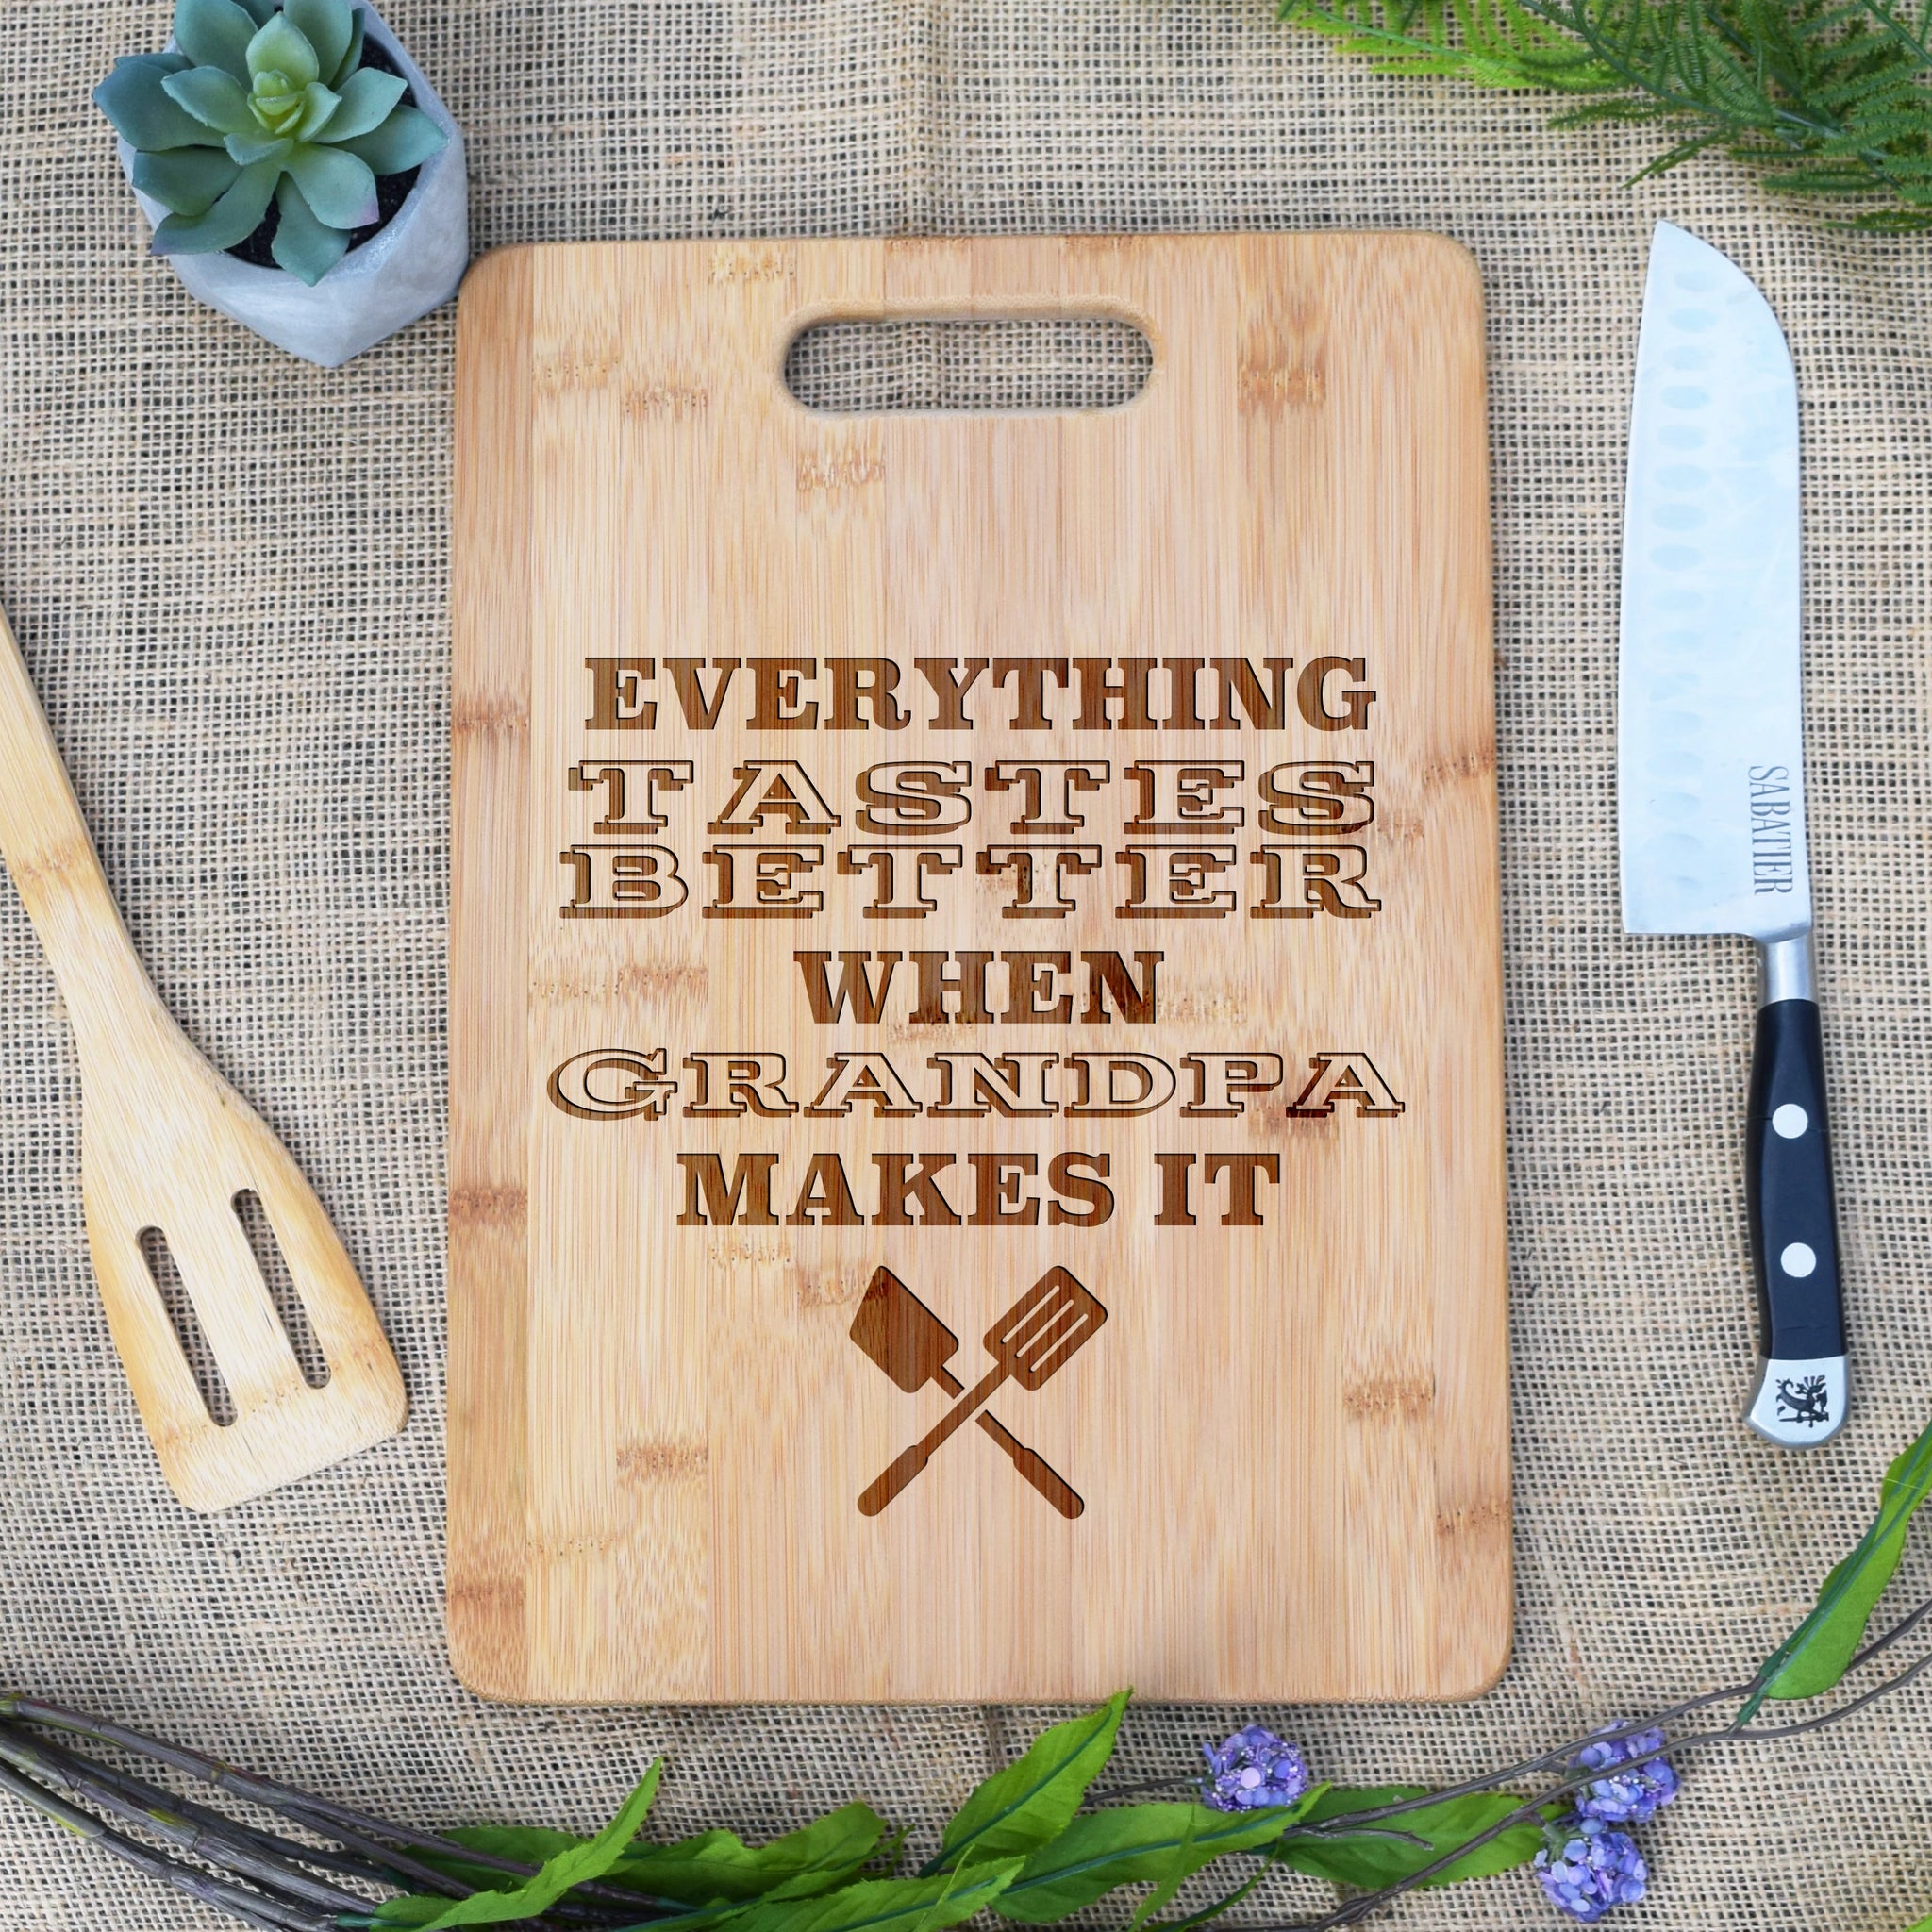 This Bamboo Cutting Board Has Made My Cooking Life So Much Better